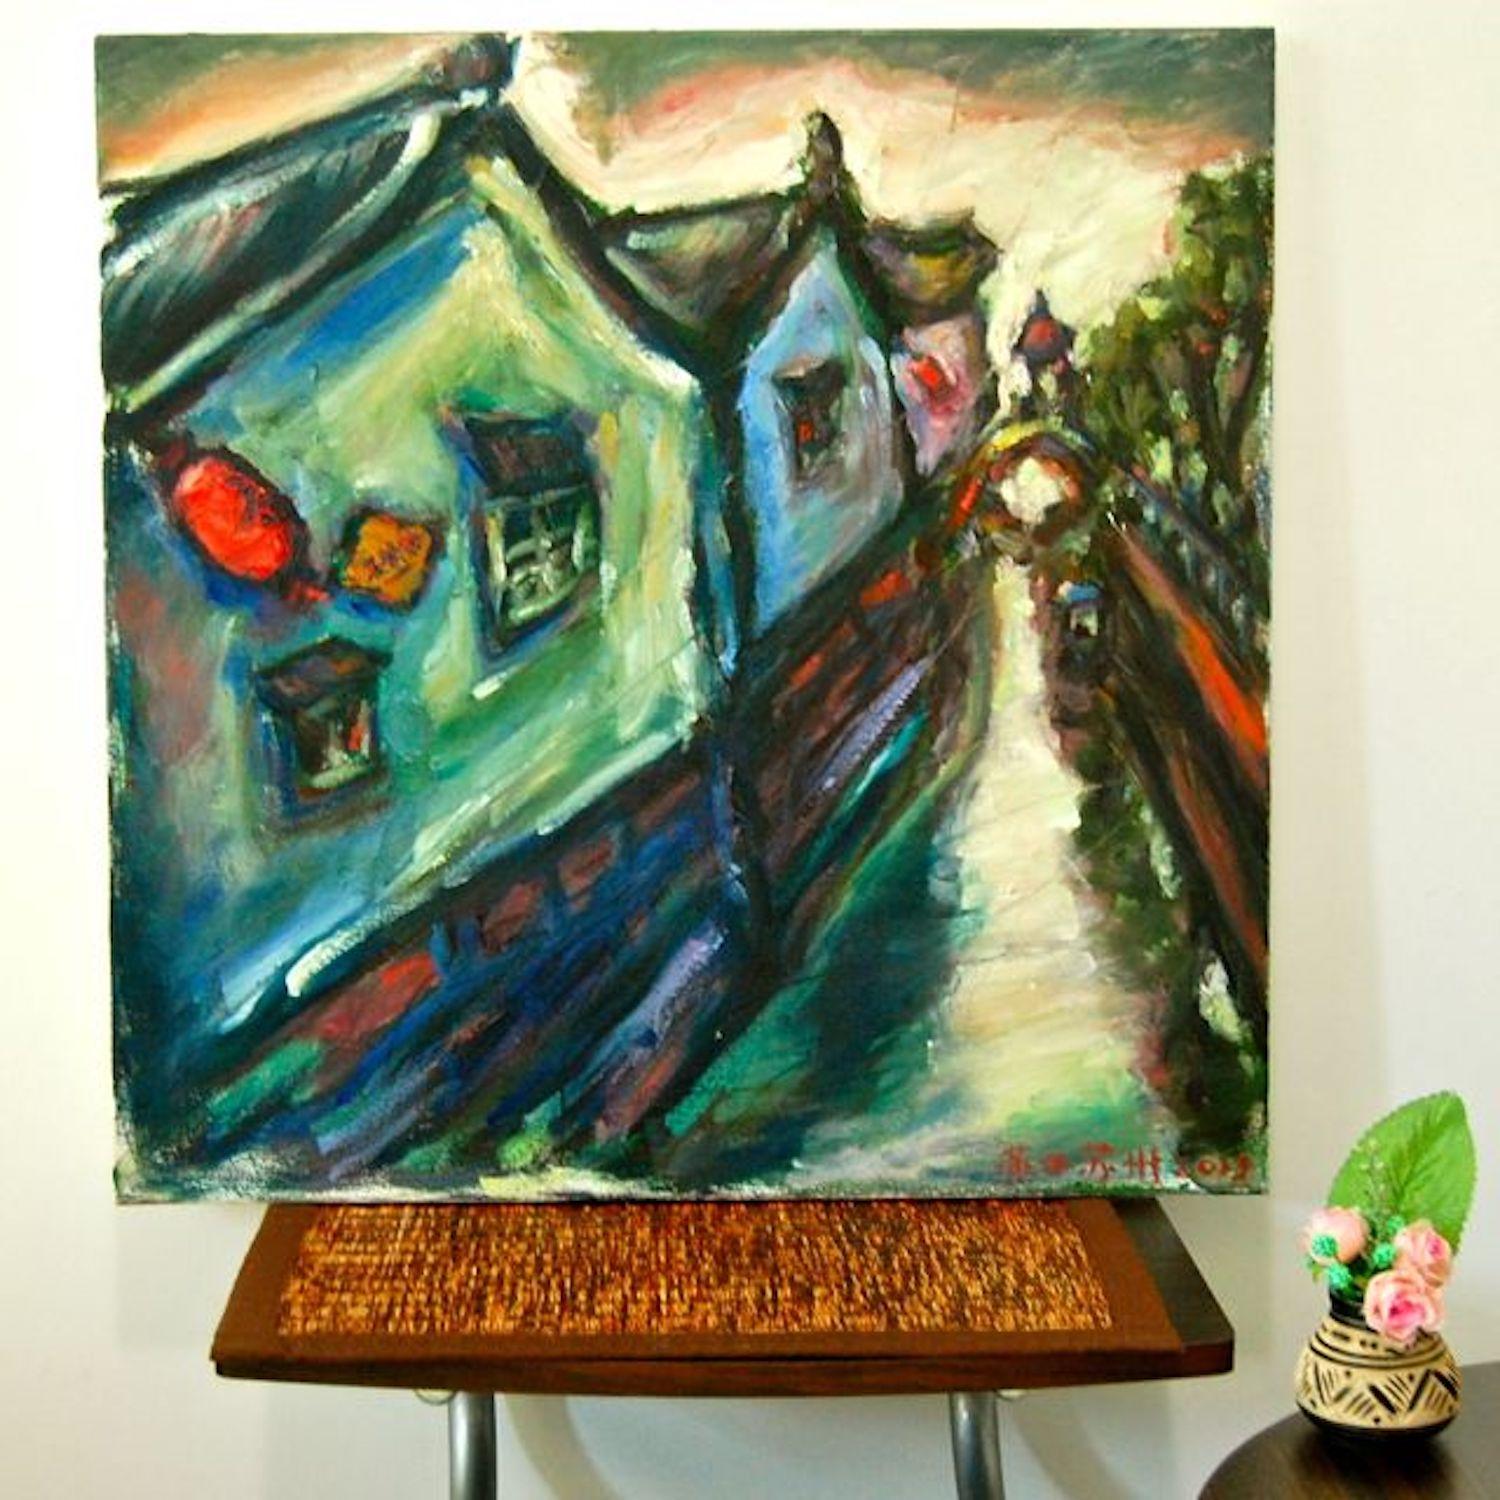 Suzhou Houses -China Painting, River Landscape, Folk Art, Original Oil Painting, Expressionist, Chinese Architecture, Red Lantern, Asian Art